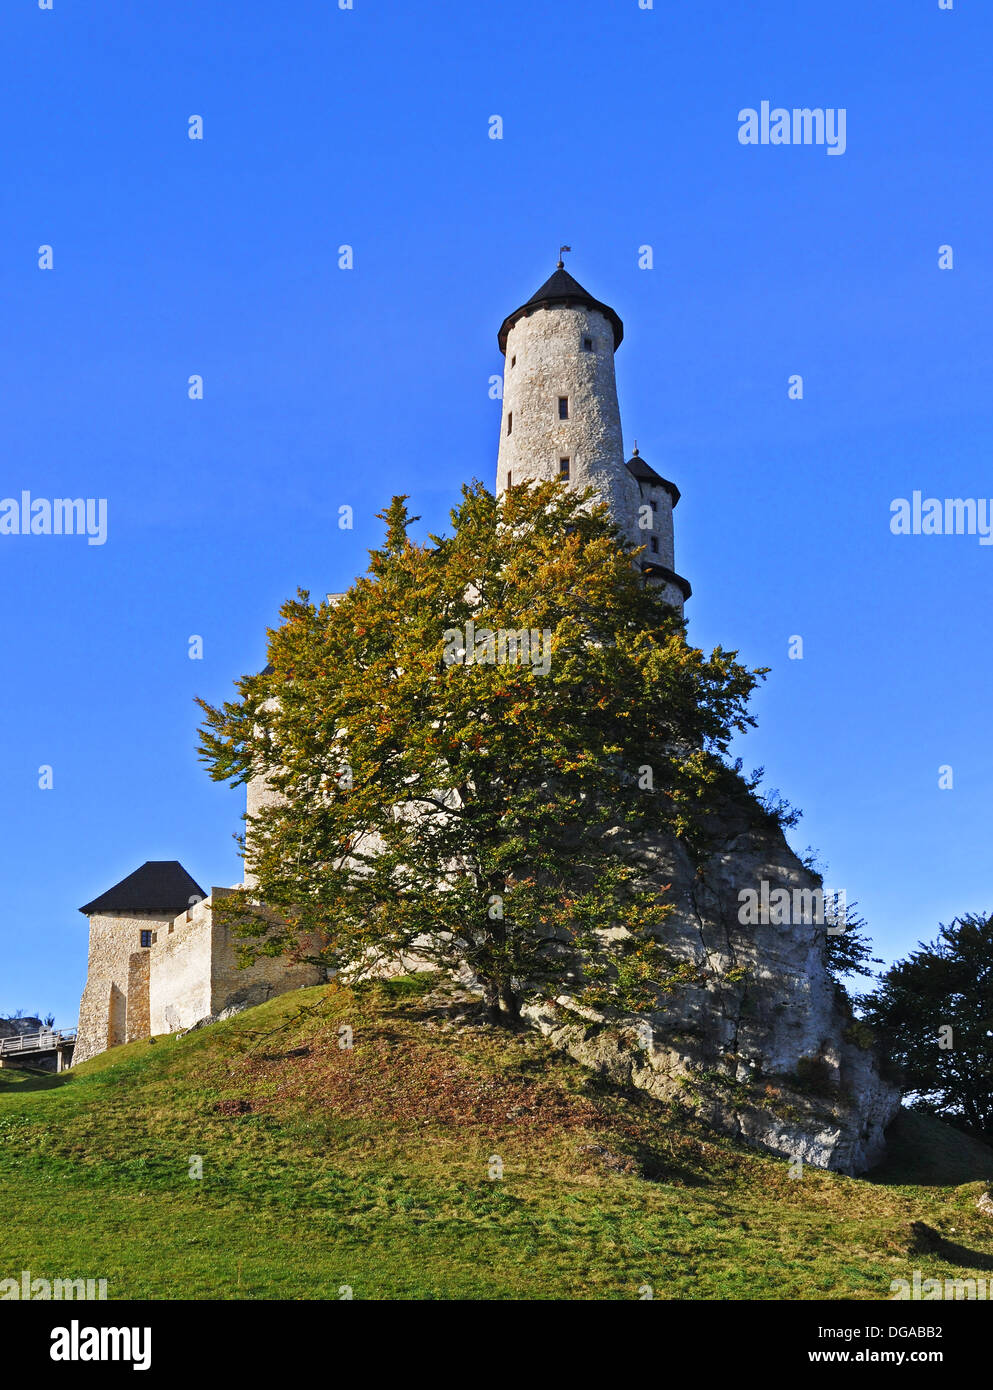 Medieval Castle in Bobolice, Poland, built in 14th century, renovated in 20th century Stock Photo